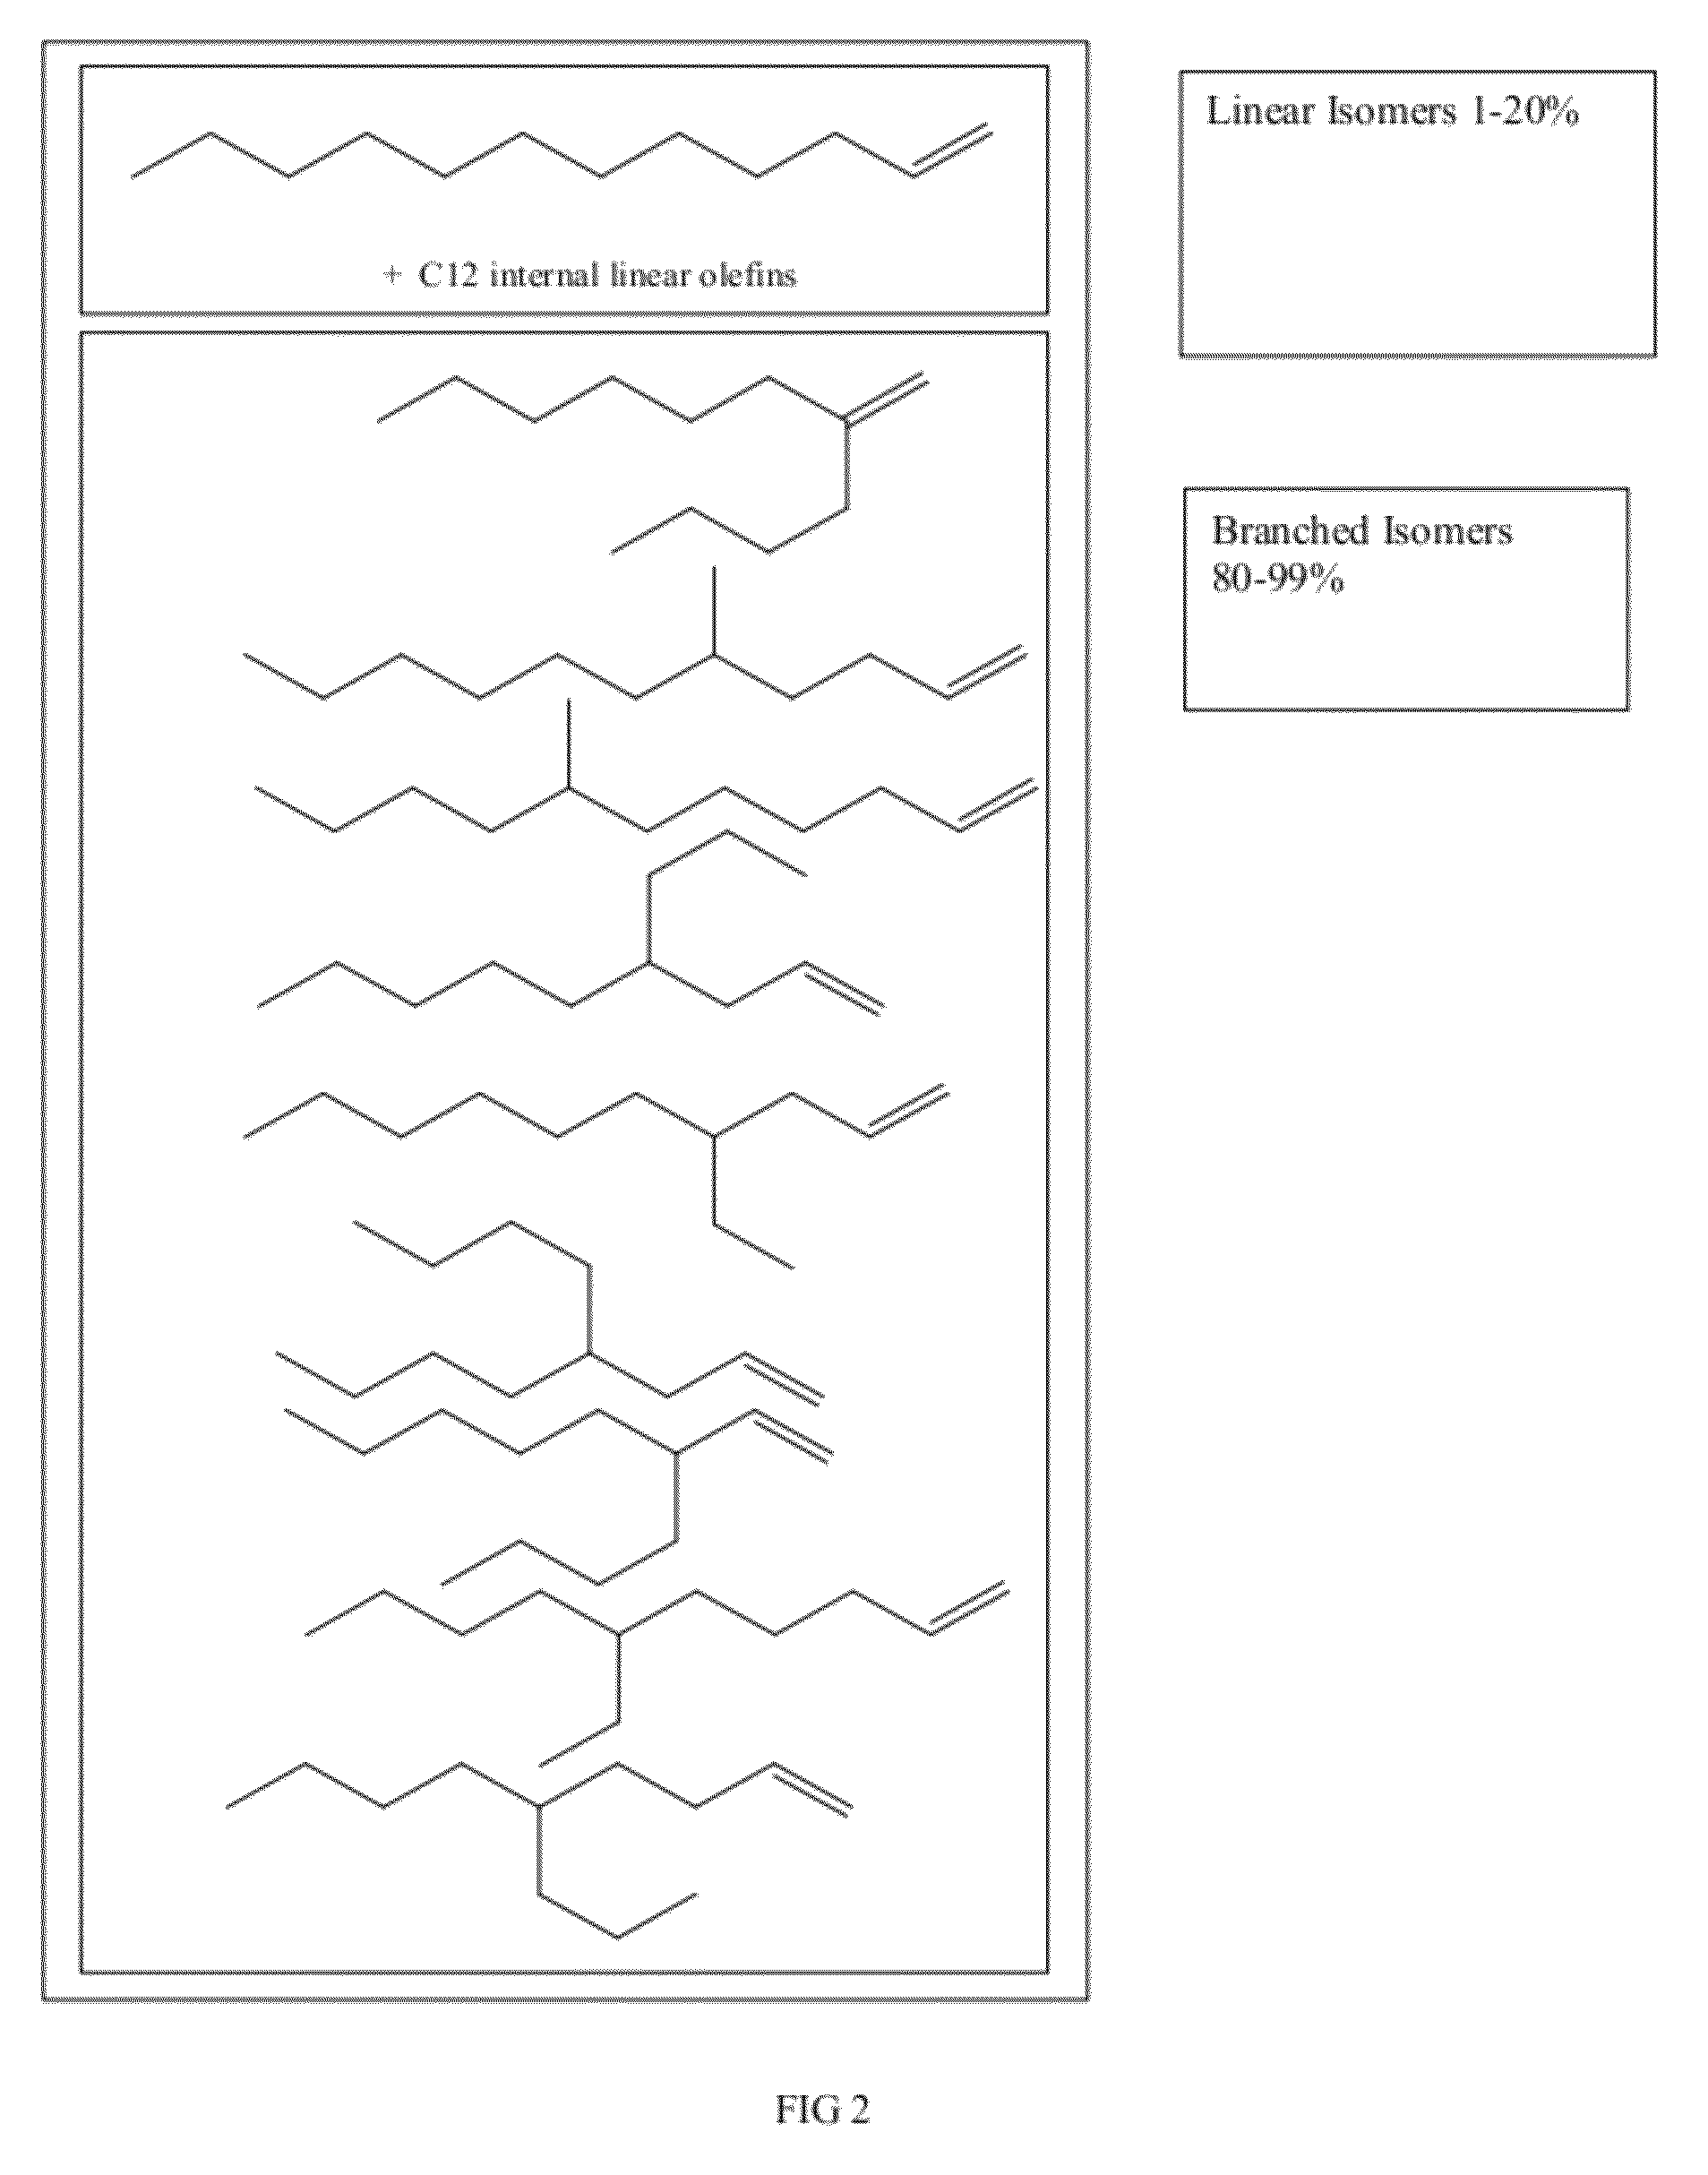 Functionalized long-chain olefin mixtures and uses therefor